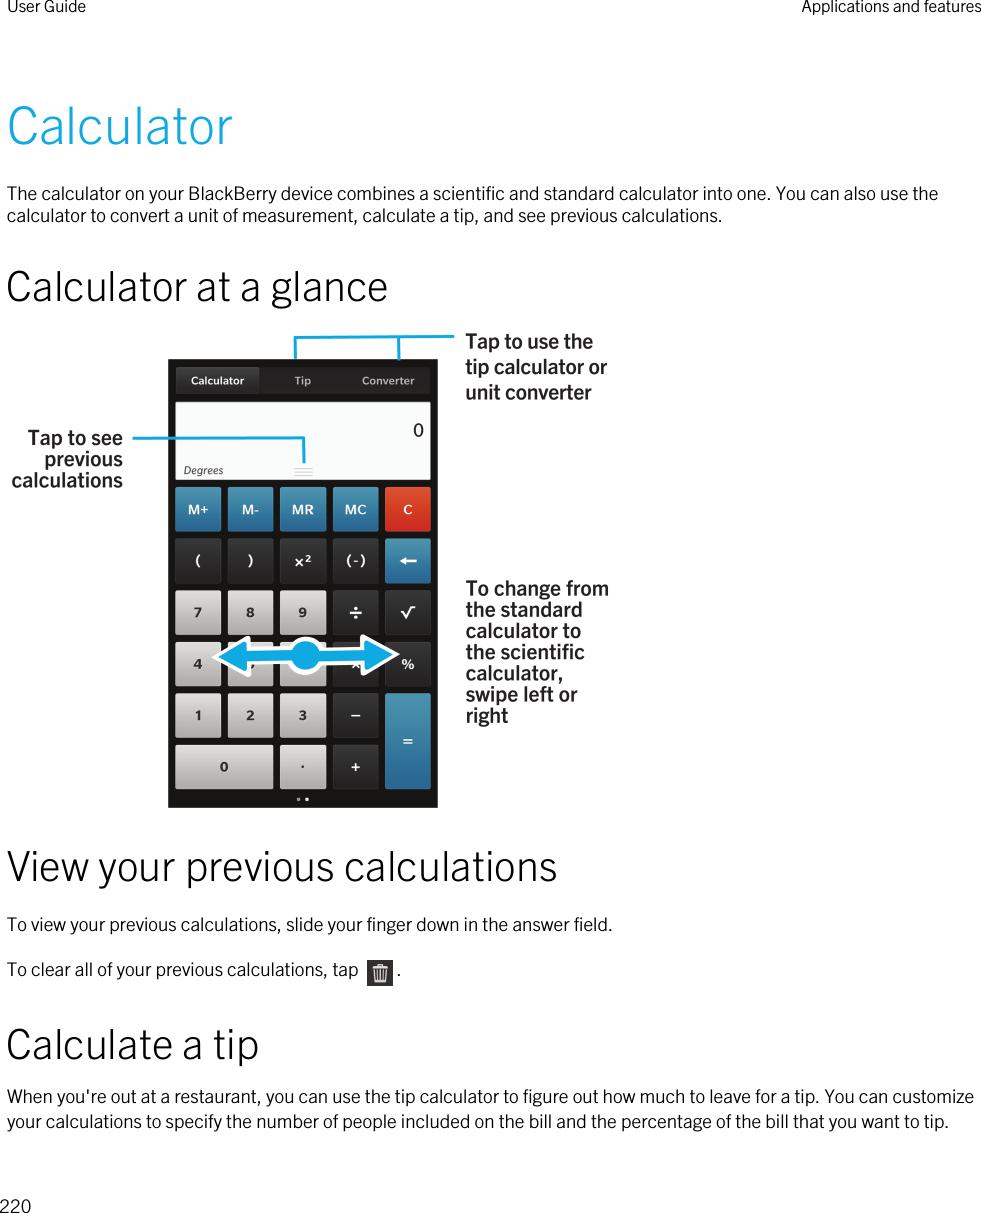 CalculatorThe calculator on your BlackBerry device combines a scientific and standard calculator into one. You can also use the calculator to convert a unit of measurement, calculate a tip, and see previous calculations.Calculator at a glanceView your previous calculationsTo view your previous calculations, slide your finger down in the answer field.To clear all of your previous calculations, tap  .Calculate a tipWhen you&apos;re out at a restaurant, you can use the tip calculator to figure out how much to leave for a tip. You can customize your calculations to specify the number of people included on the bill and the percentage of the bill that you want to tip. User Guide Applications and features220